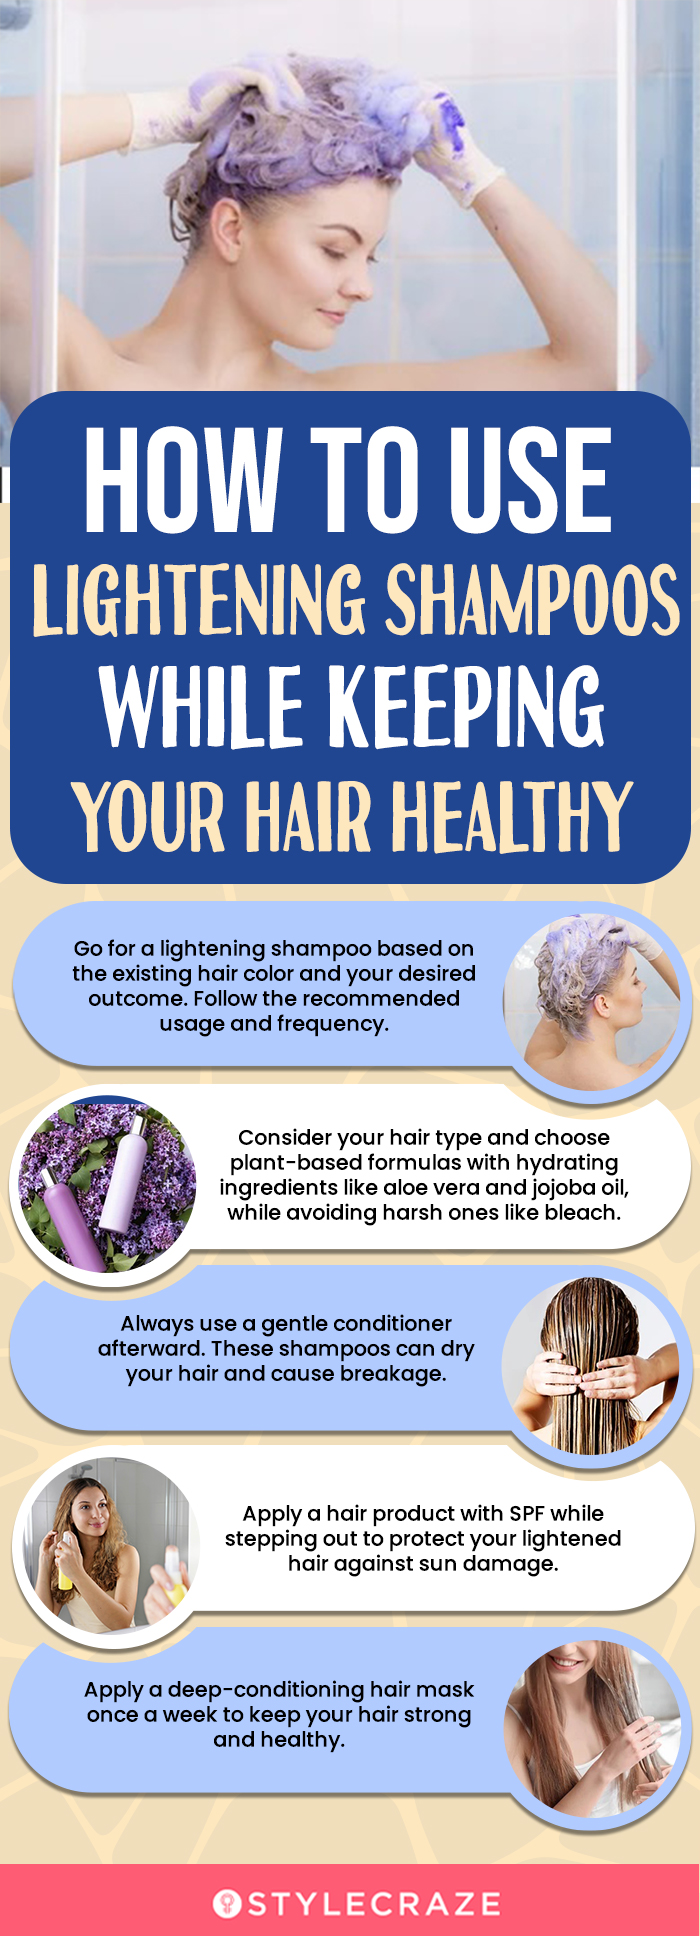 How To Use Lightening Shampoos While Keeping Your Hair Healthy (infographic)